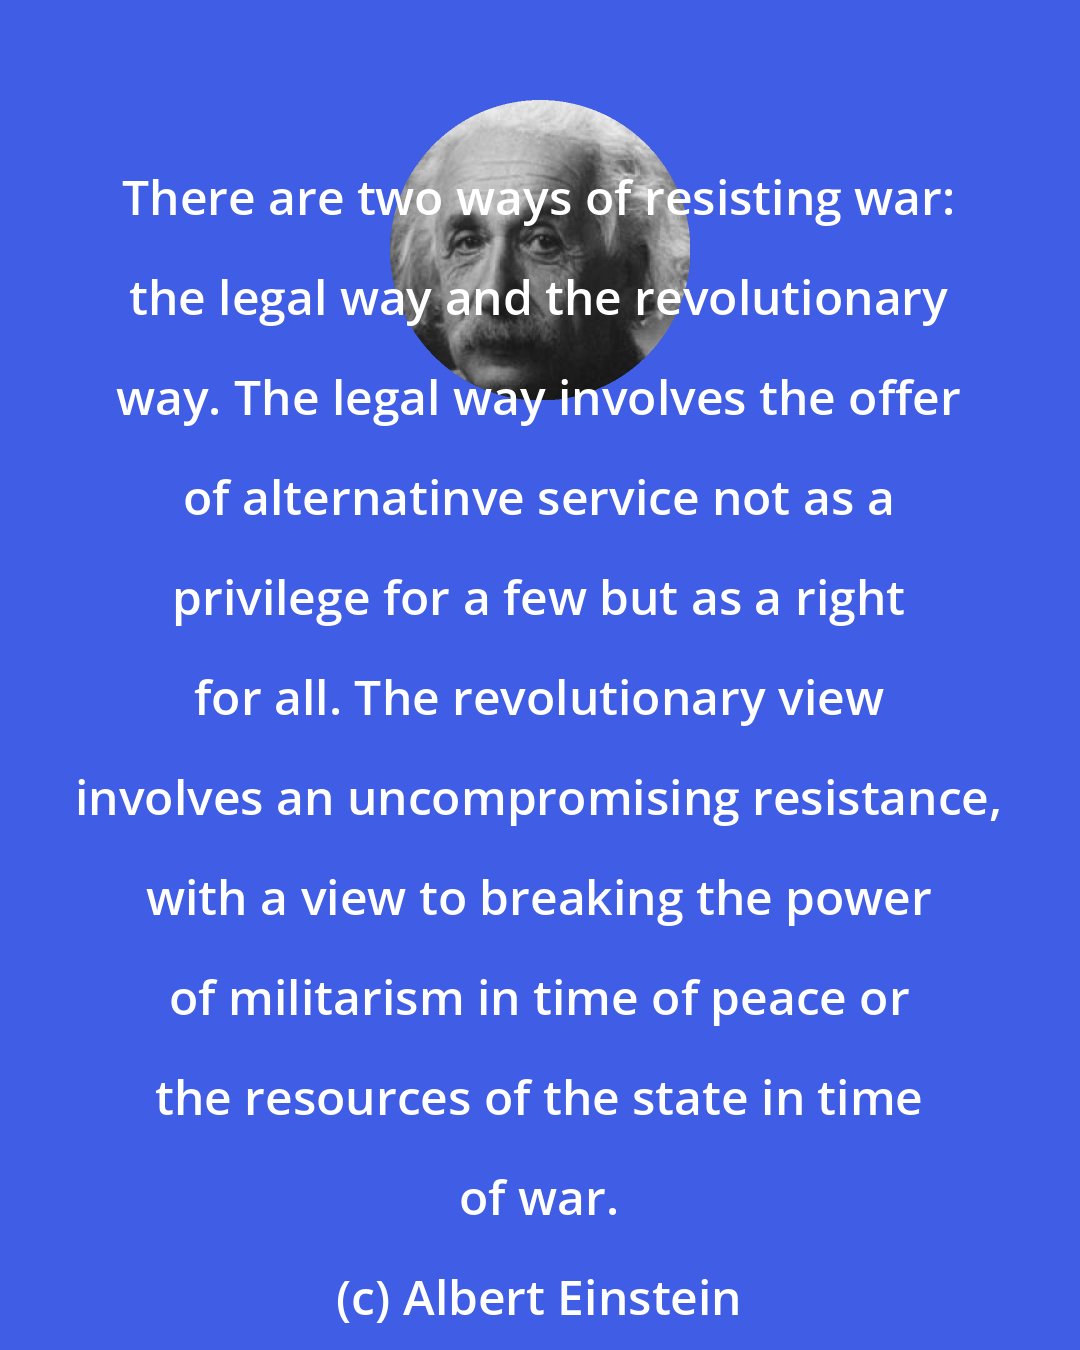 Albert Einstein: There are two ways of resisting war: the legal way and the revolutionary way. The legal way involves the offer of alternatinve service not as a privilege for a few but as a right for all. The revolutionary view involves an uncompromising resistance, with a view to breaking the power of militarism in time of peace or the resources of the state in time of war.